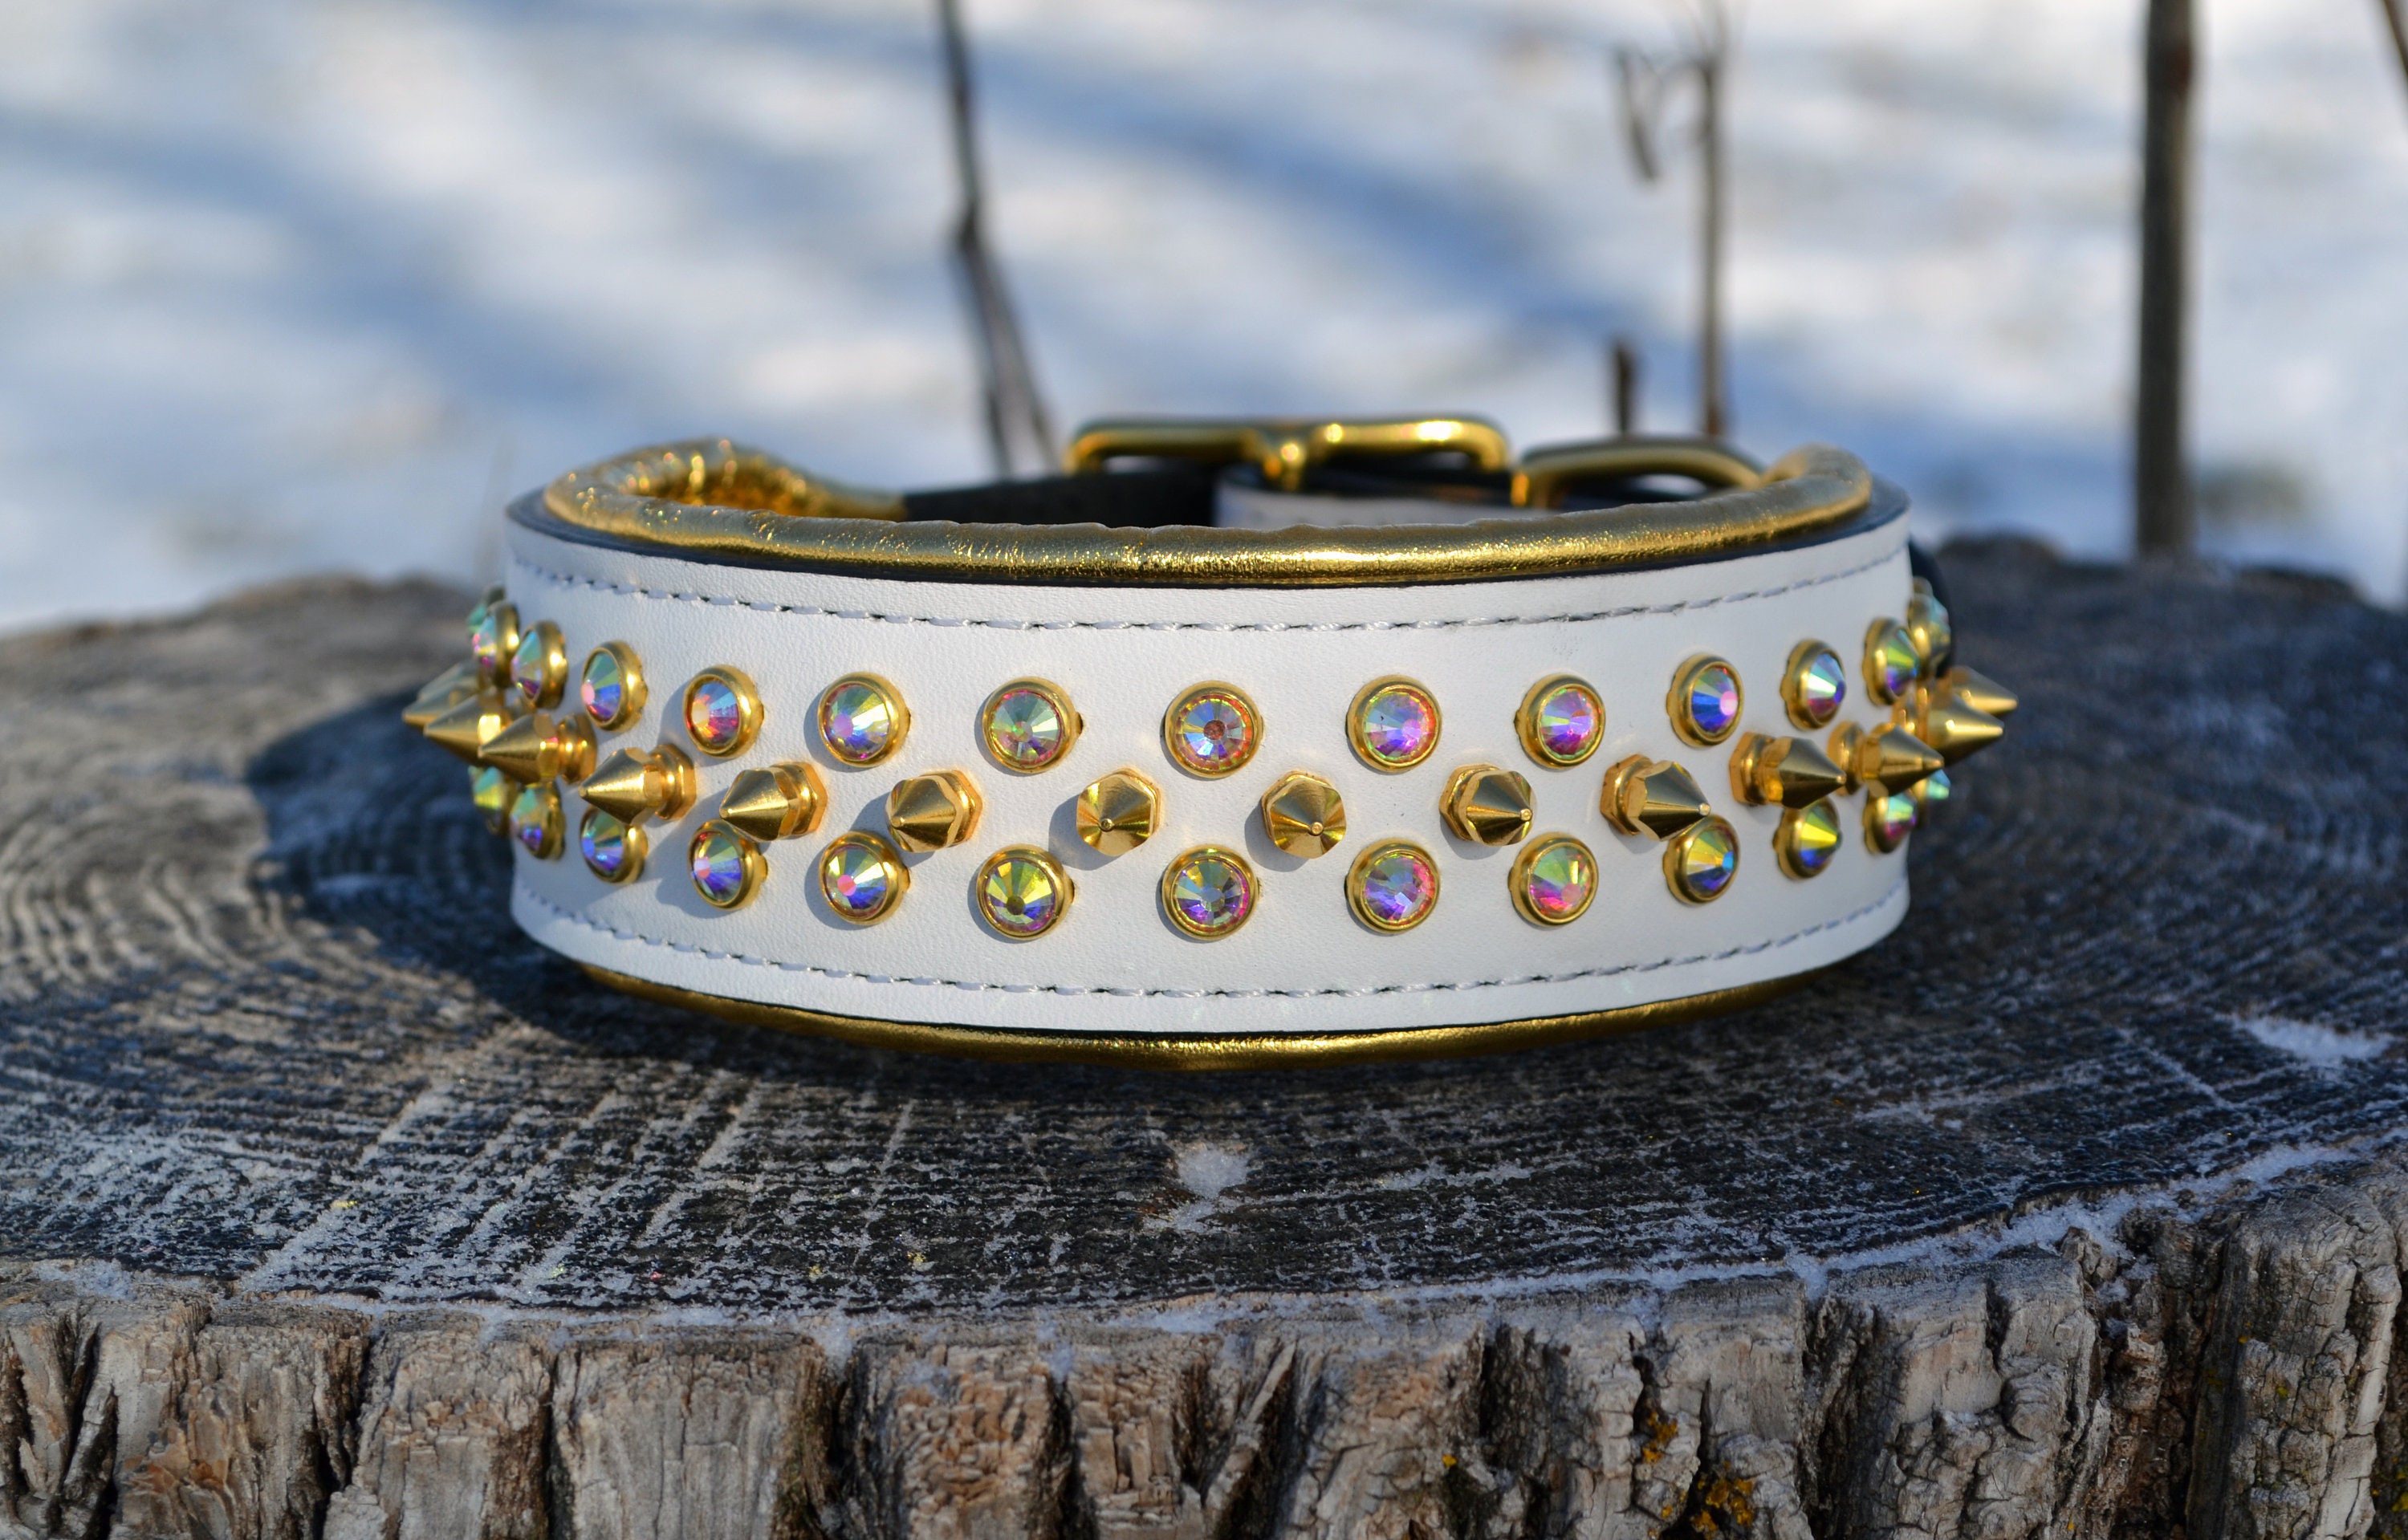 Designer inspired collars - by Dante's Closet - Made in Canada